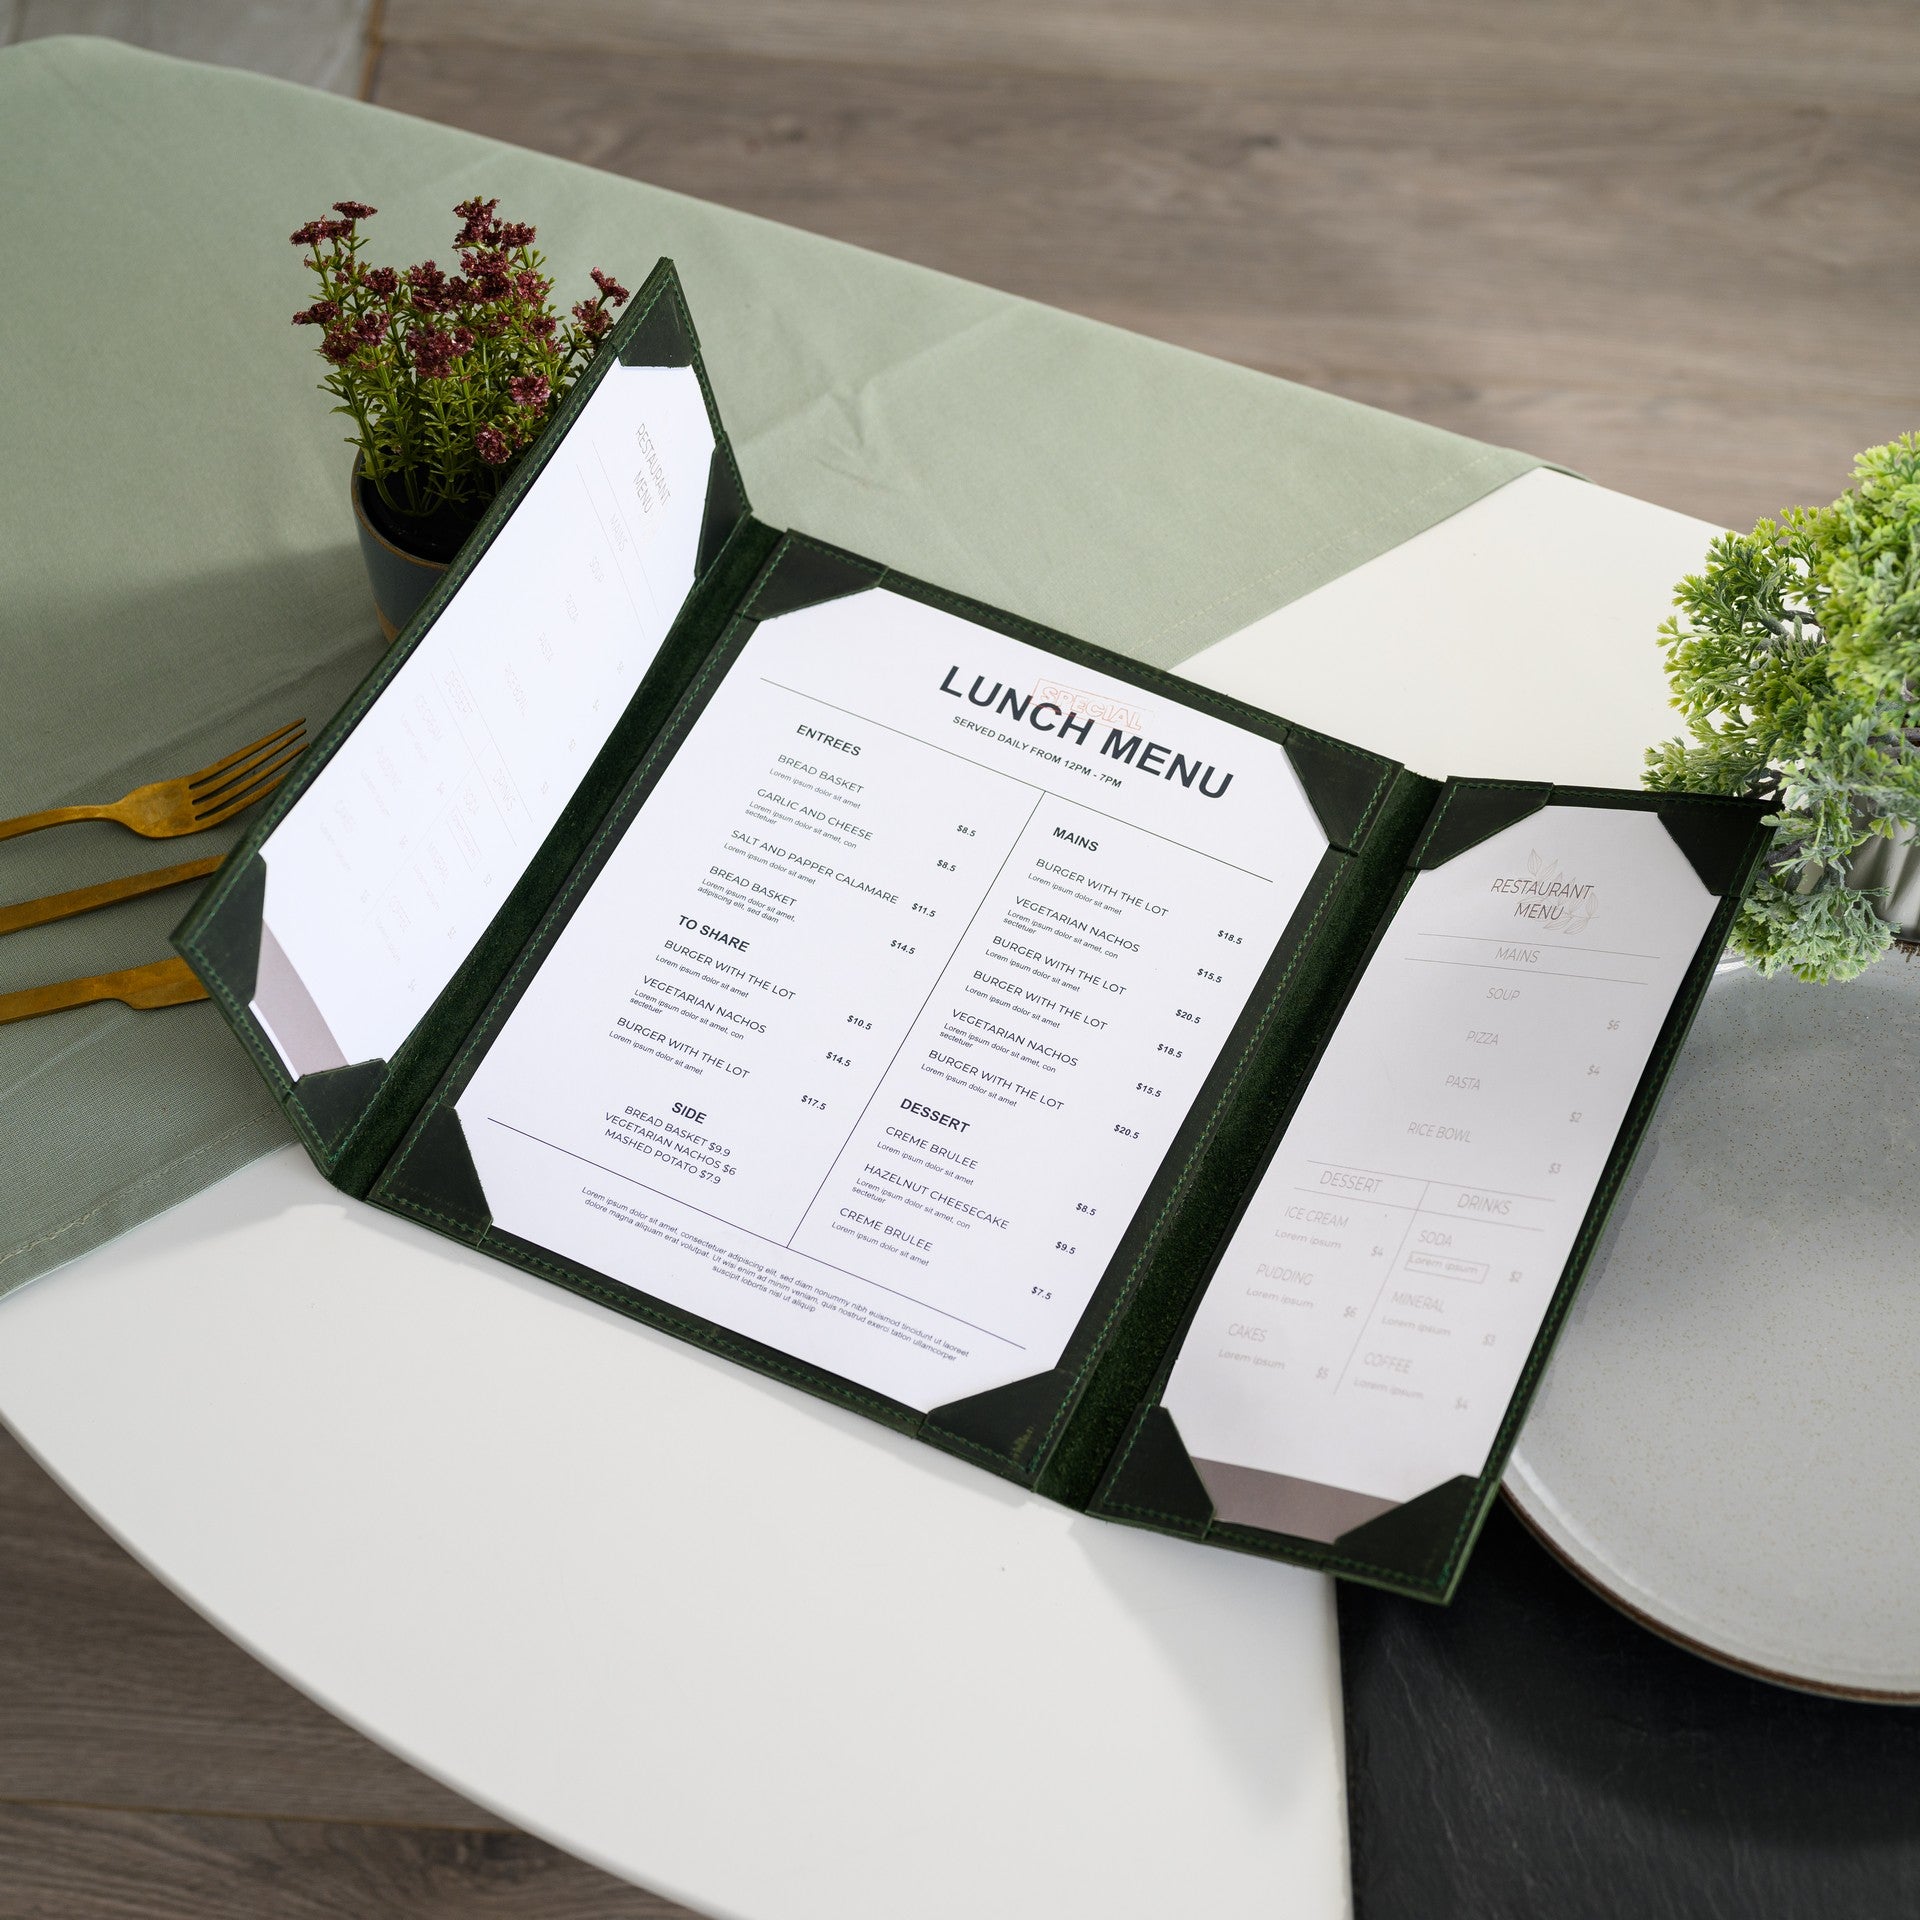 Customize your menu presentation with logo embossing on soft leather.